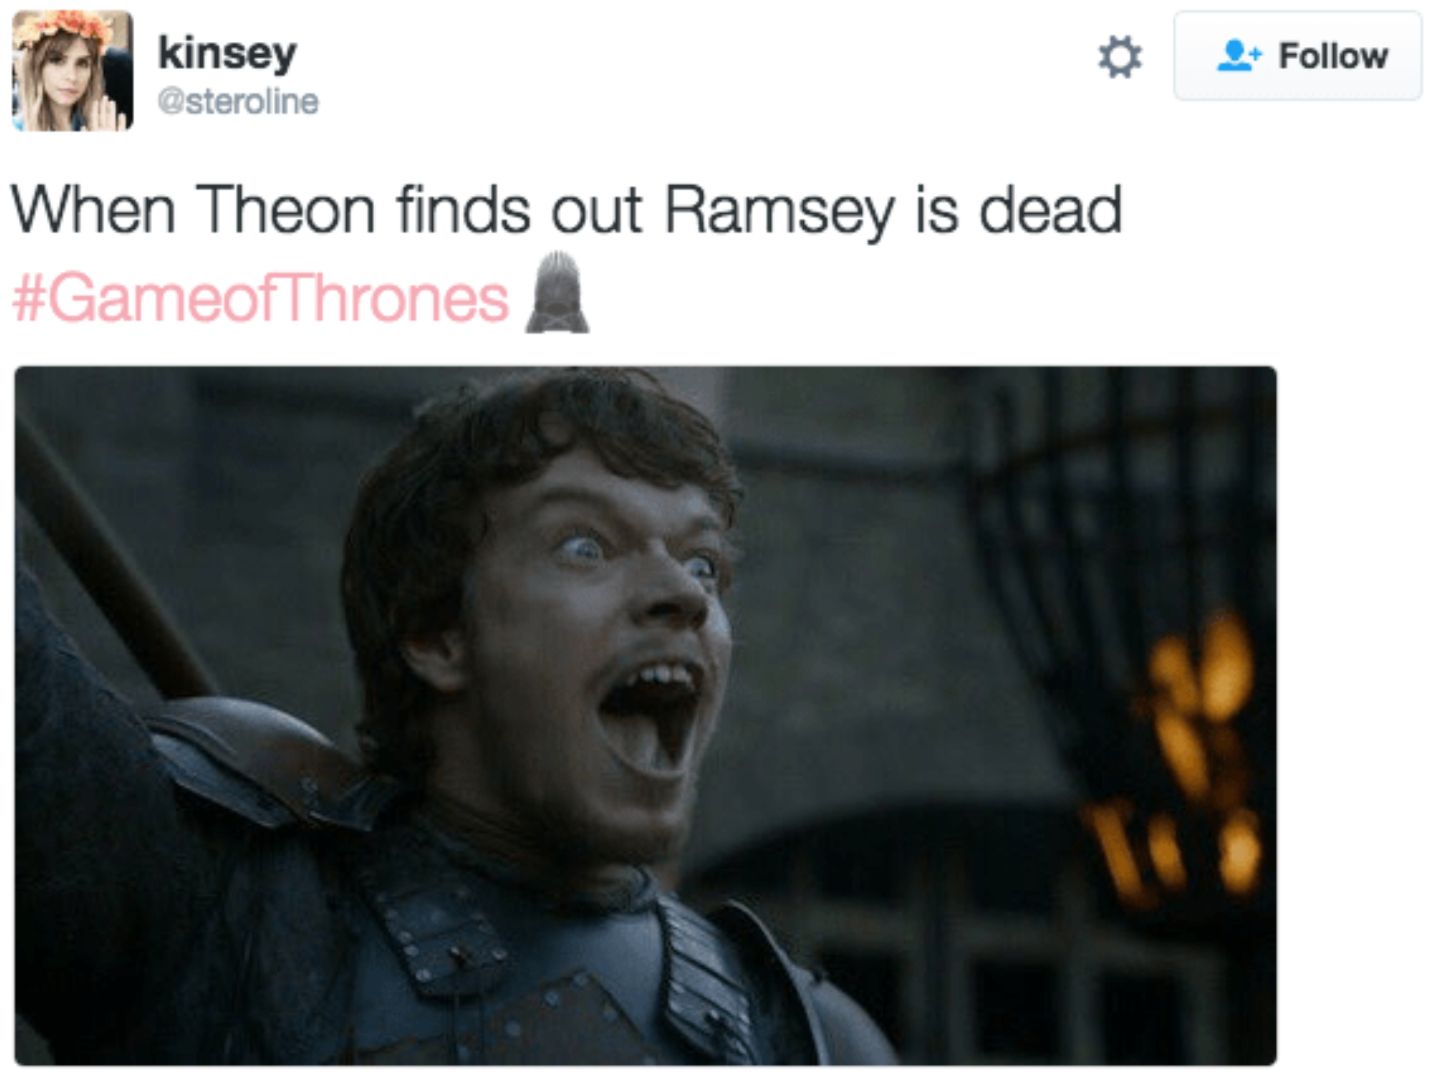 Meme about Theon's reaction to Ramsay dying in Game of Thrones. 